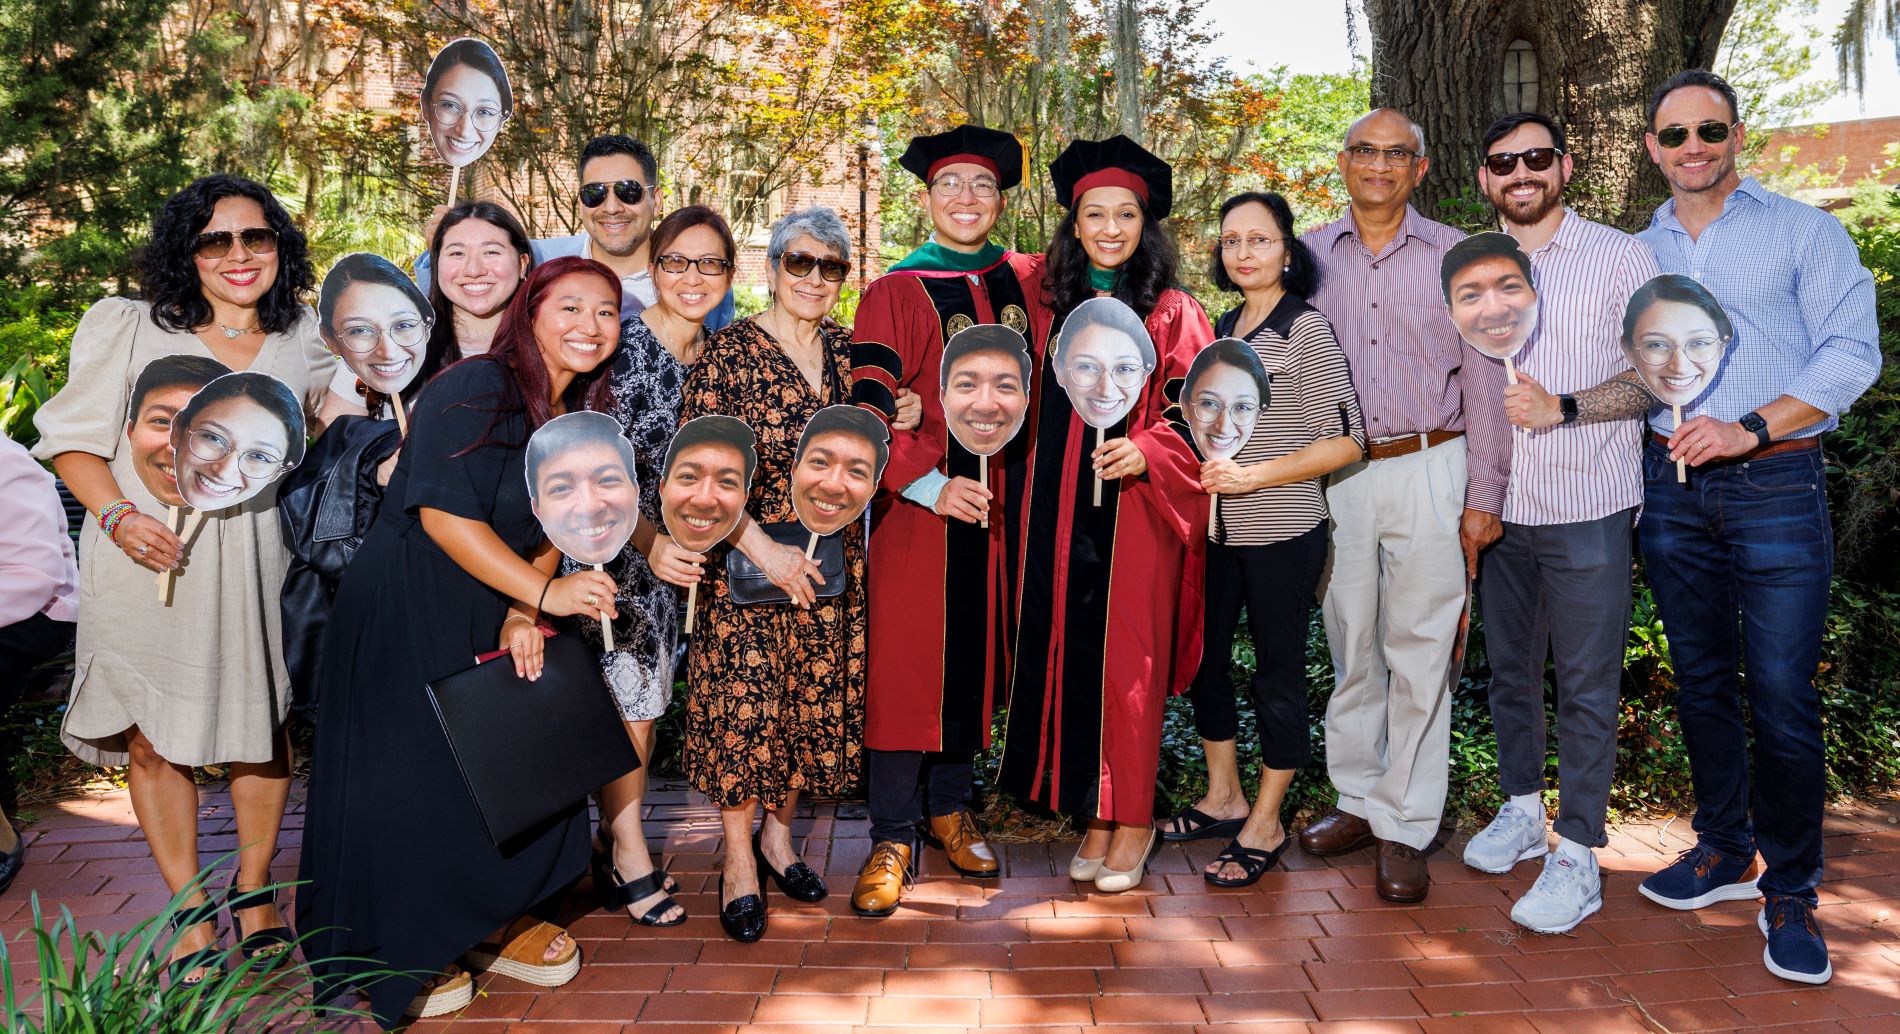 Dr. Ishani Patel and Dr. Daniel Alban, surrounded by their families and holding masks.